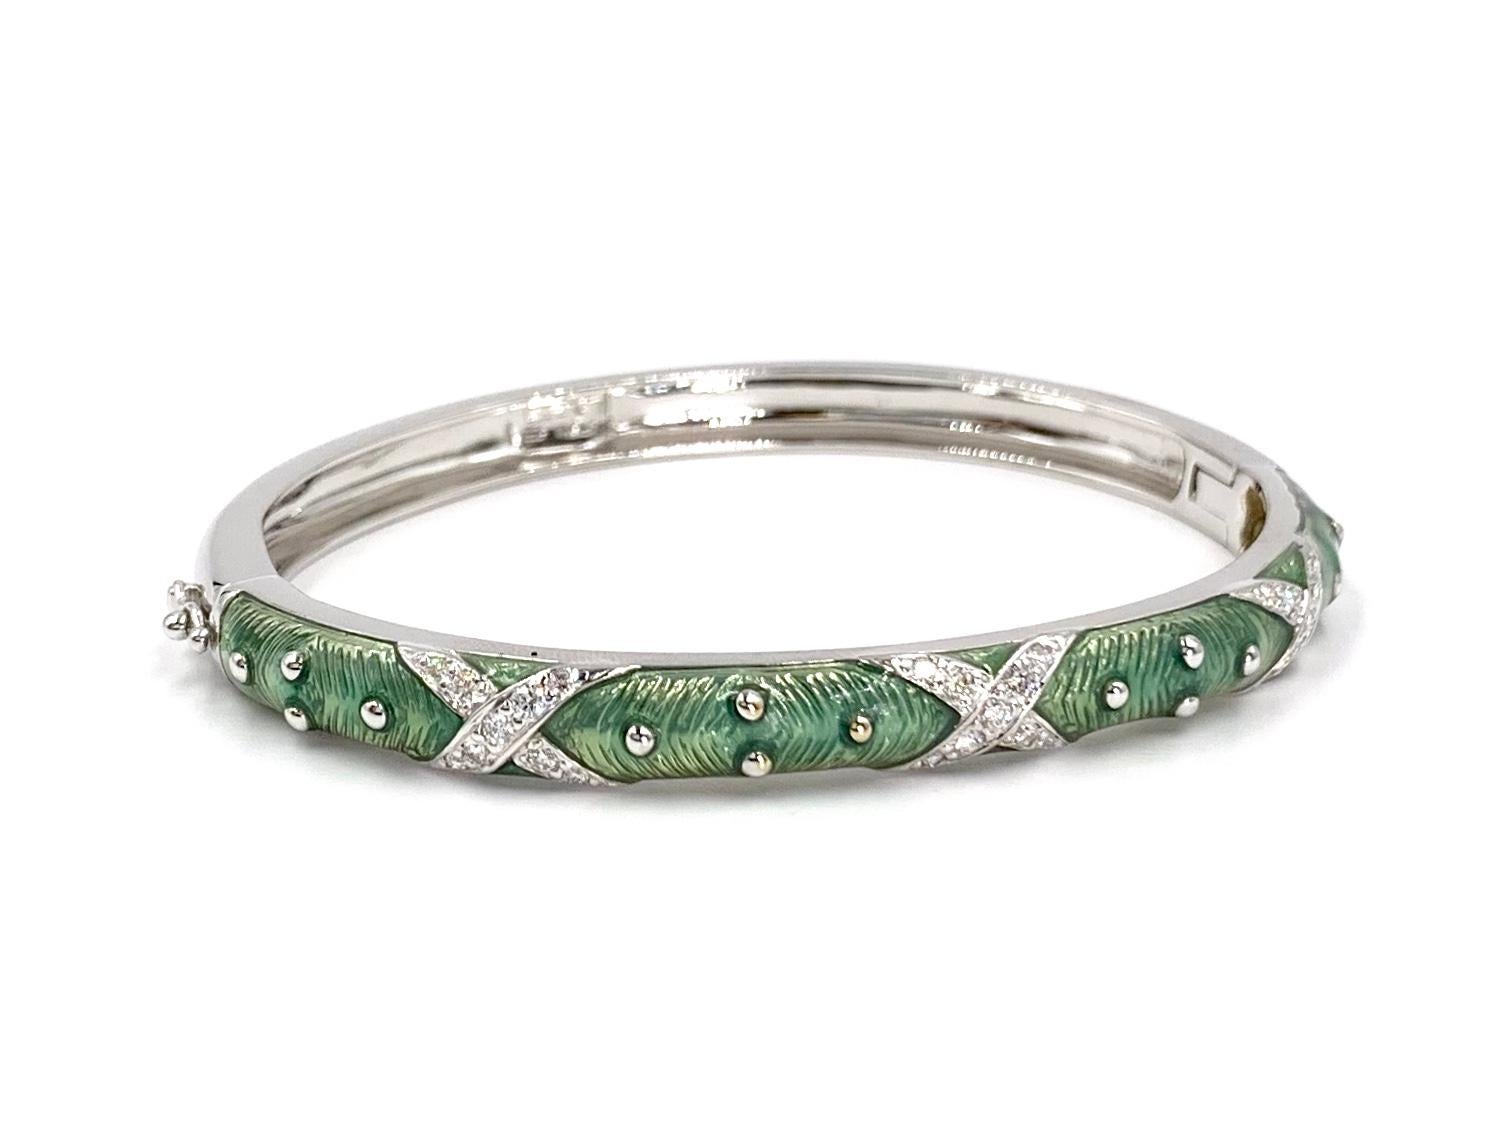 Made by expert fine enamel jewelry designer, HIDALGO. This 18 karat white gold 6mm wide bangle bracelet features a truly unique shade of opalescent light green enamel that appears to shimmer and .46 carats of round brilliant white diamonds at